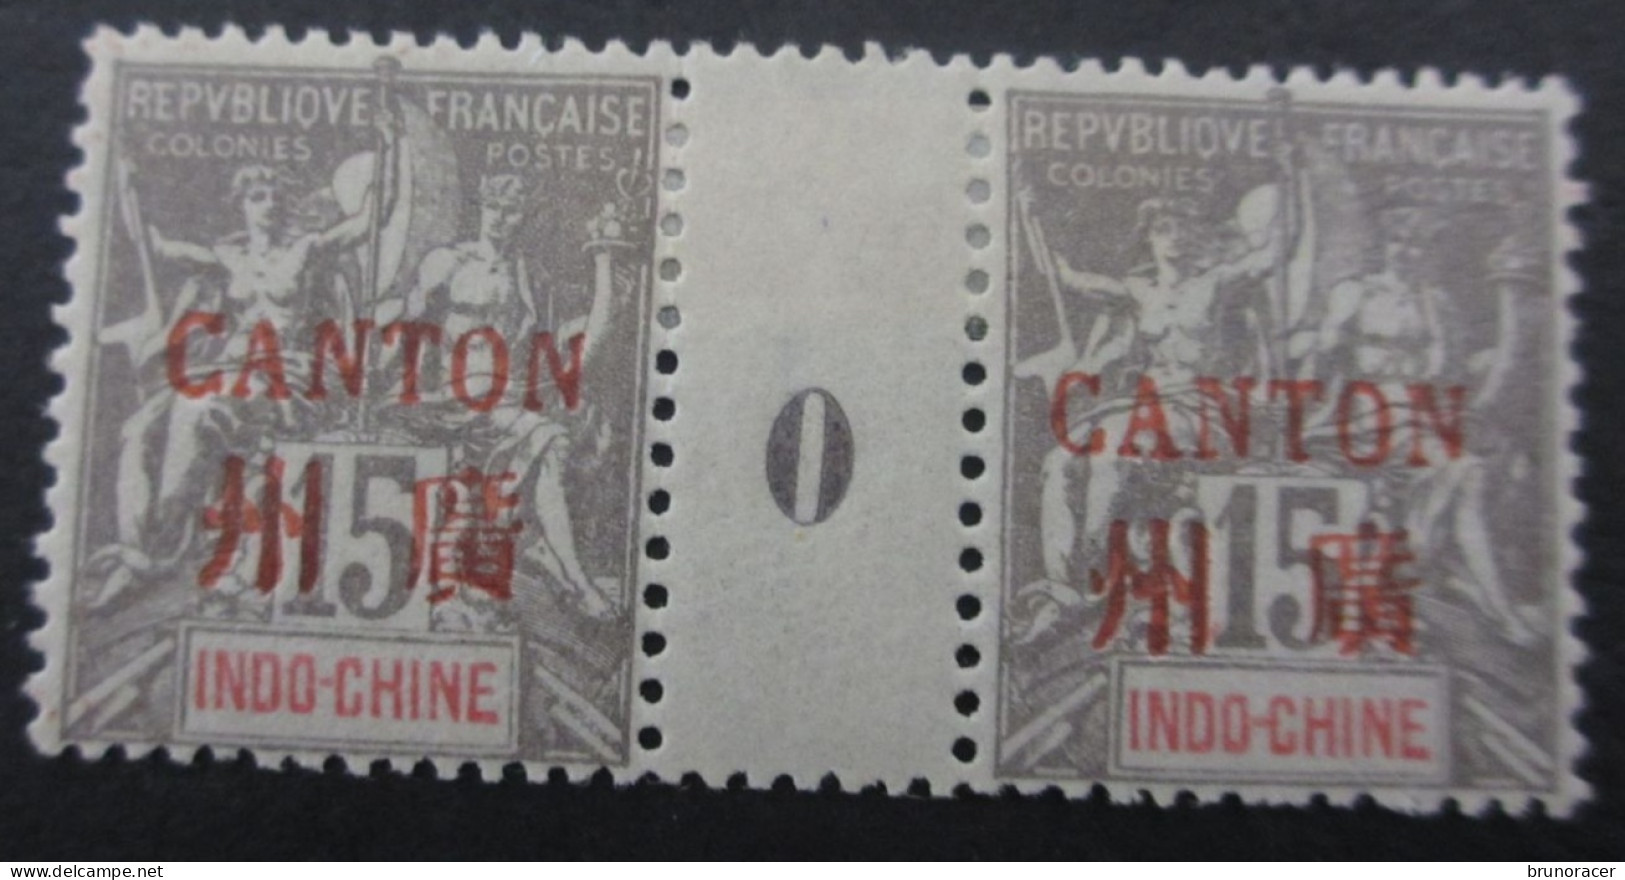 CANTON Bx INDOCHINOIS PAIRE MILLESIME N°8 NEUF* TB COTE 165 EUROS VOIR SCANS - Unused Stamps